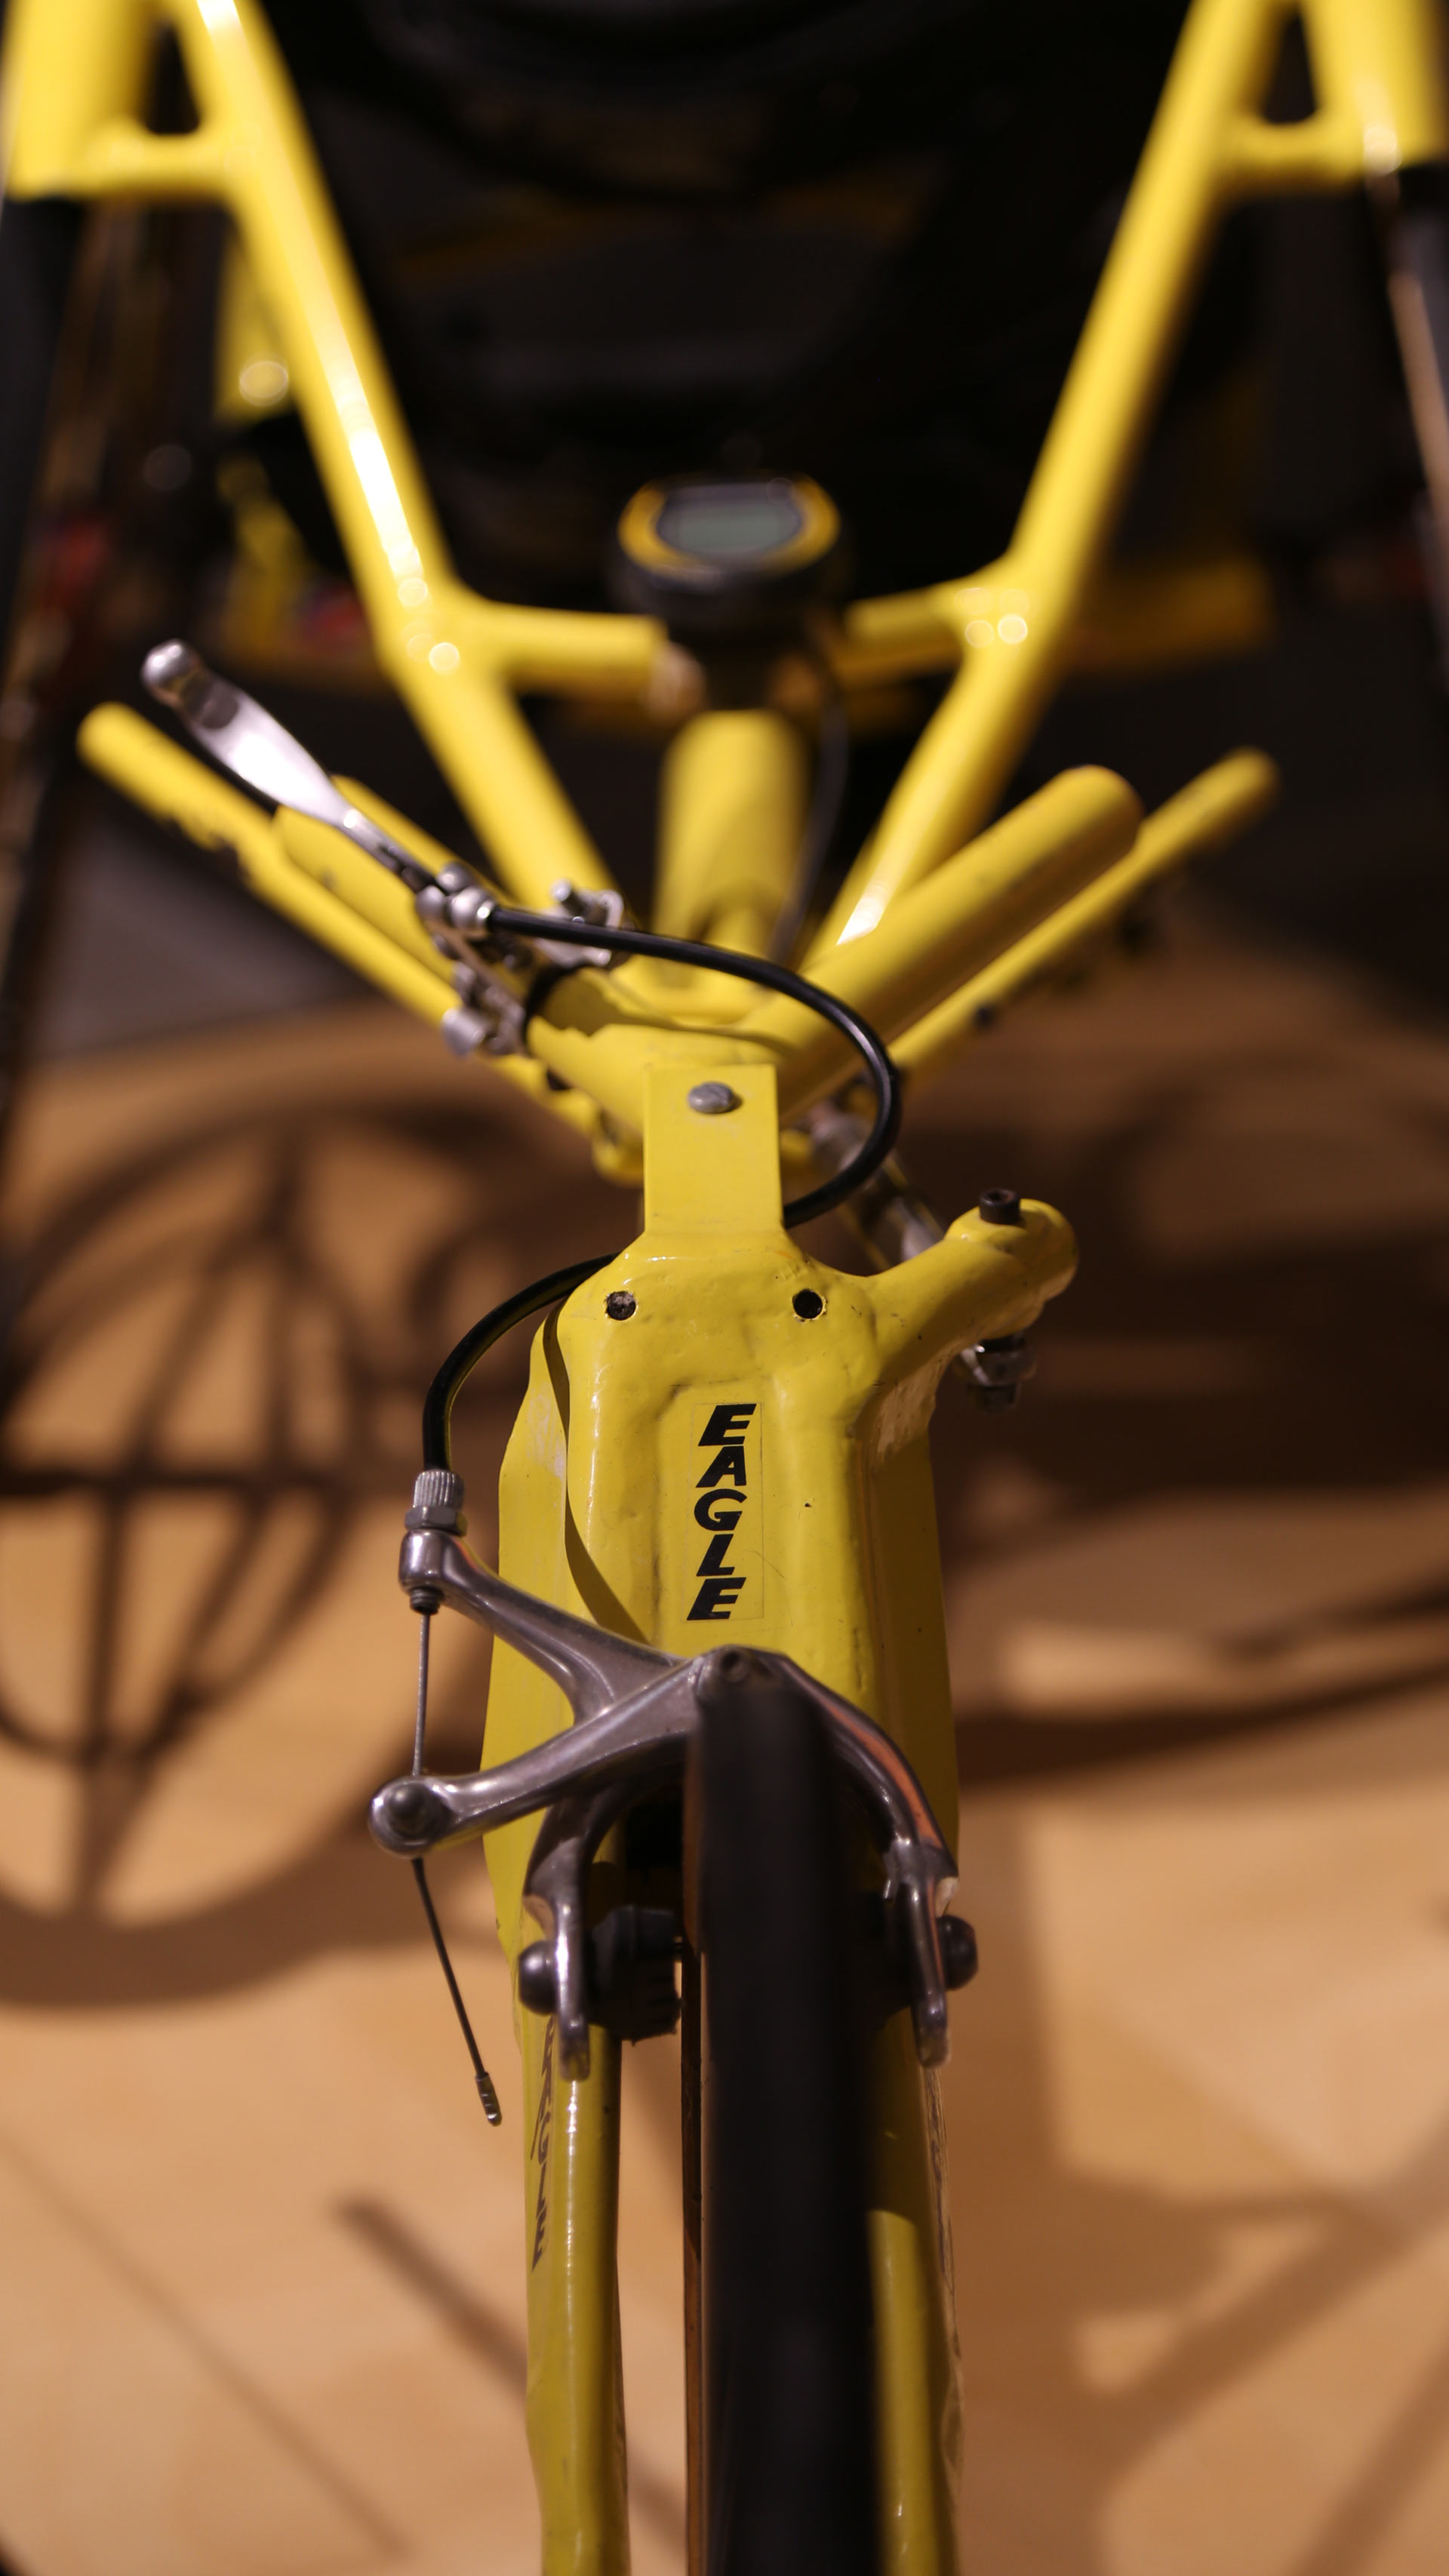 close-up of the body of a yellow bike with 'eagle' brand writing on it